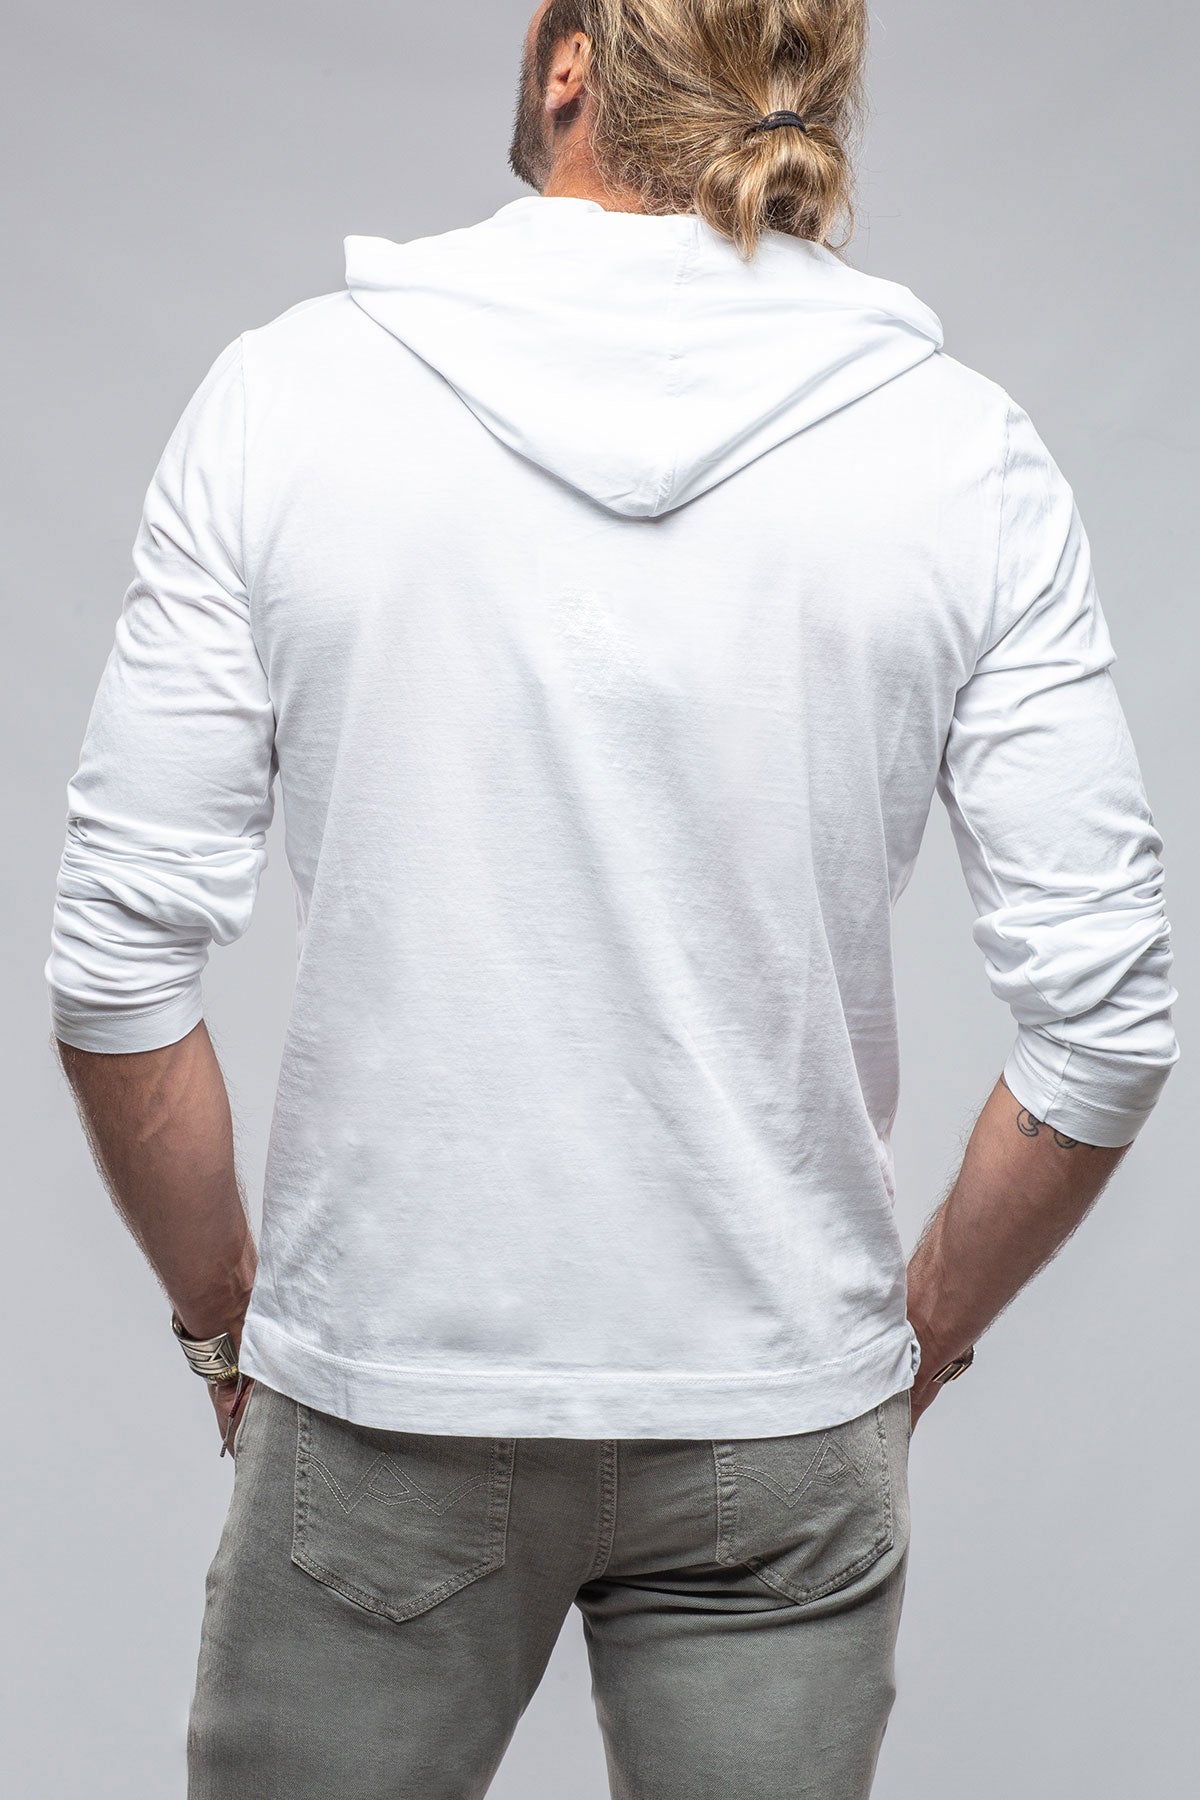 Ventura Hooded Tee in White | Mens - Shirts - T-Shirts | Gimo's Cotton